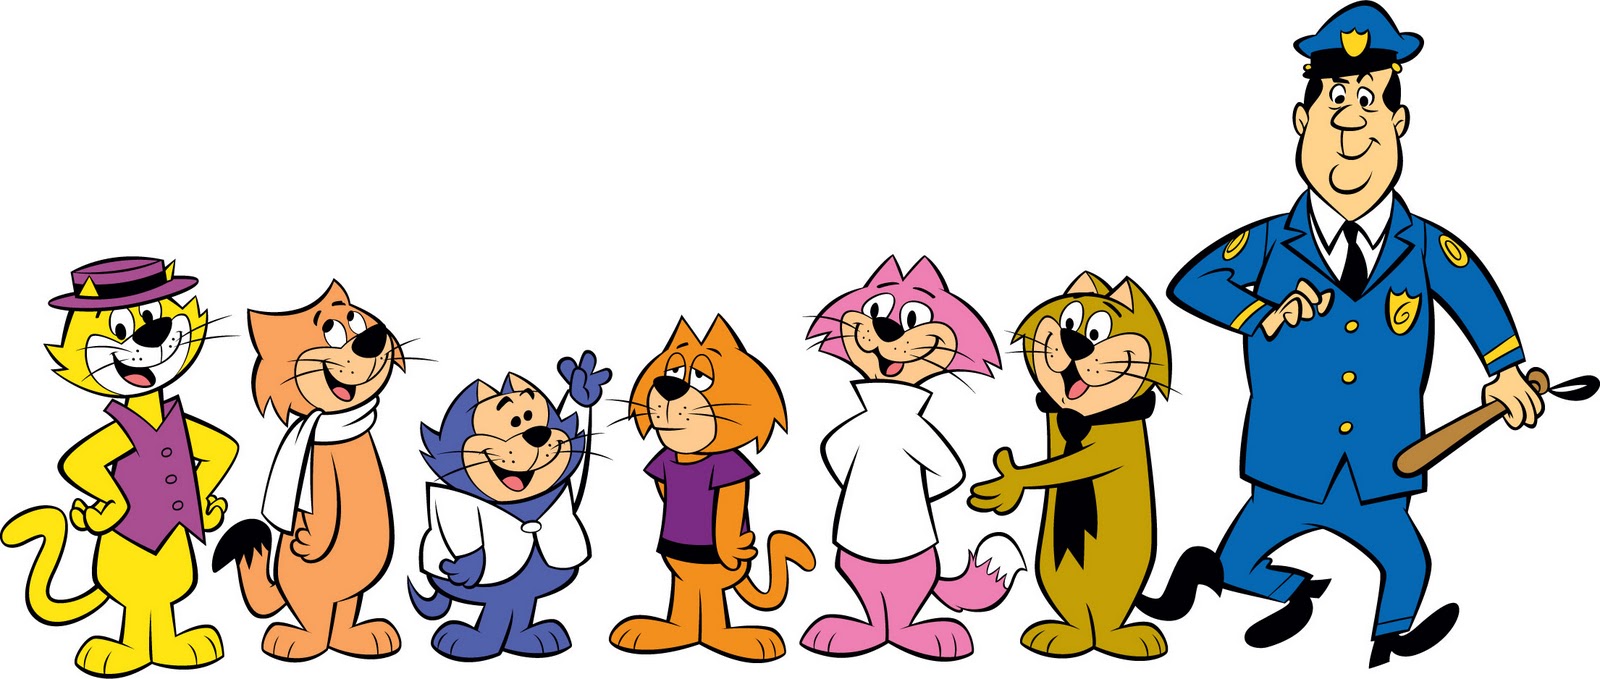 Crazy Kitty Chick Cats in Cartoons